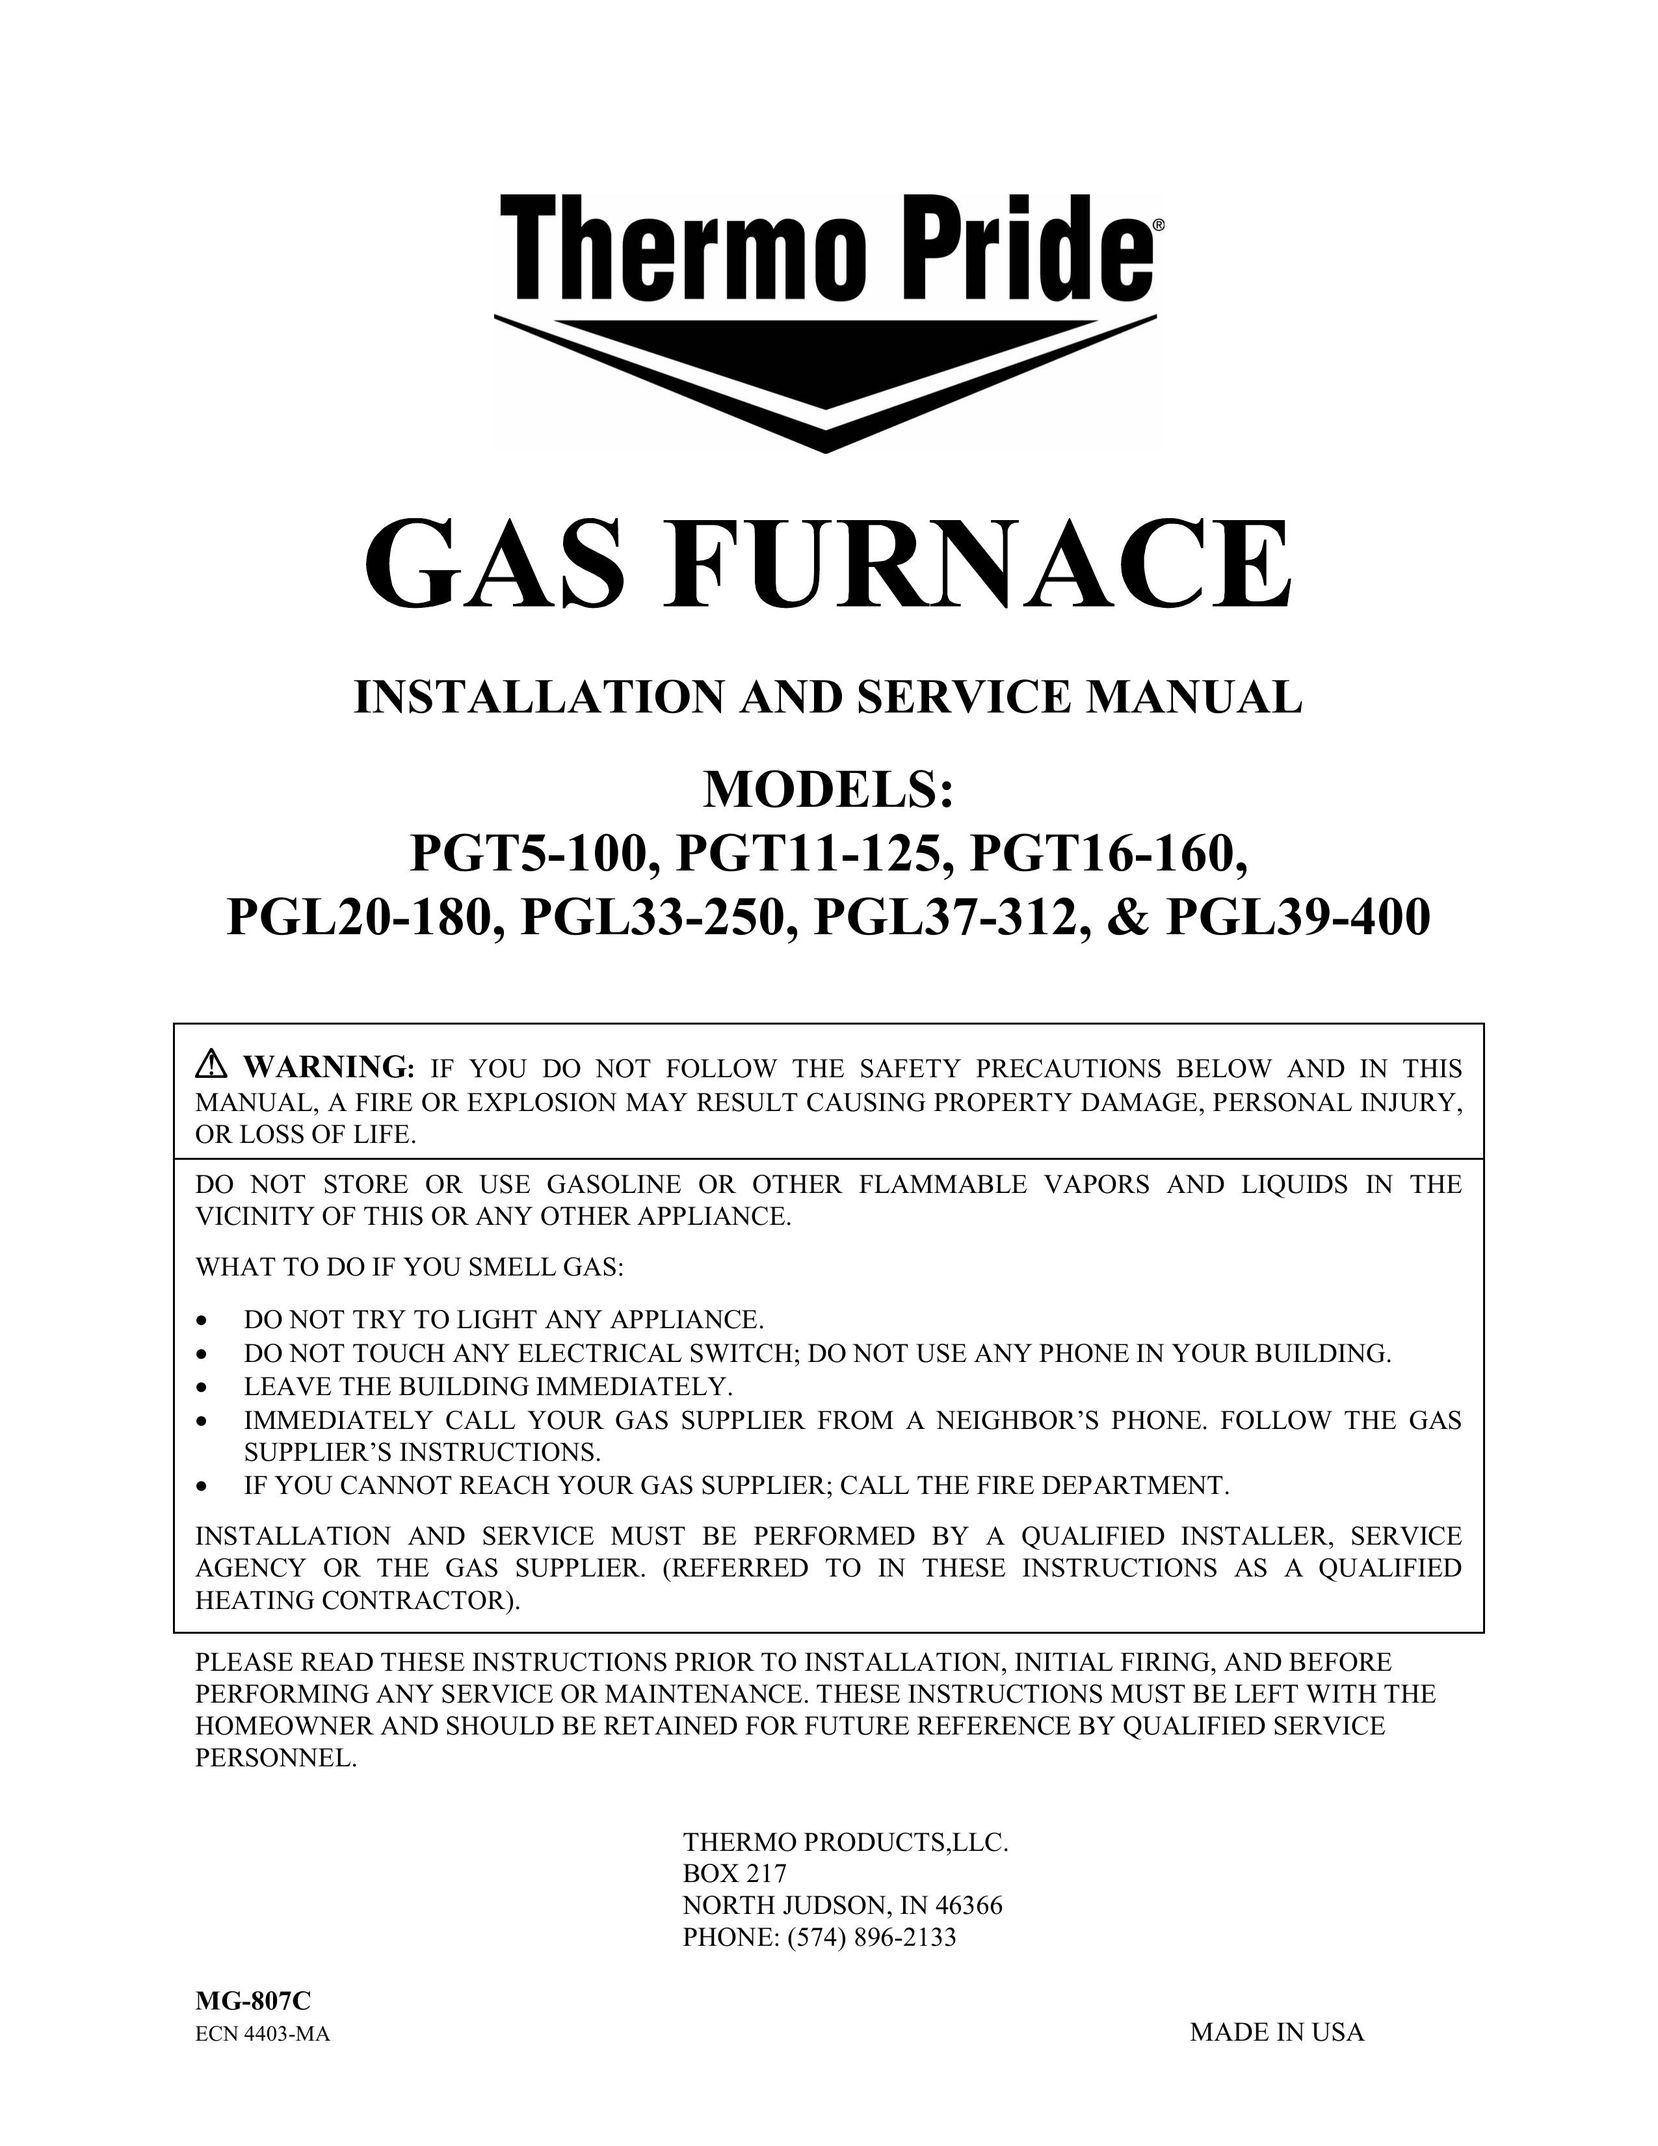 Thermo Products PGT11-125 Burner User Manual